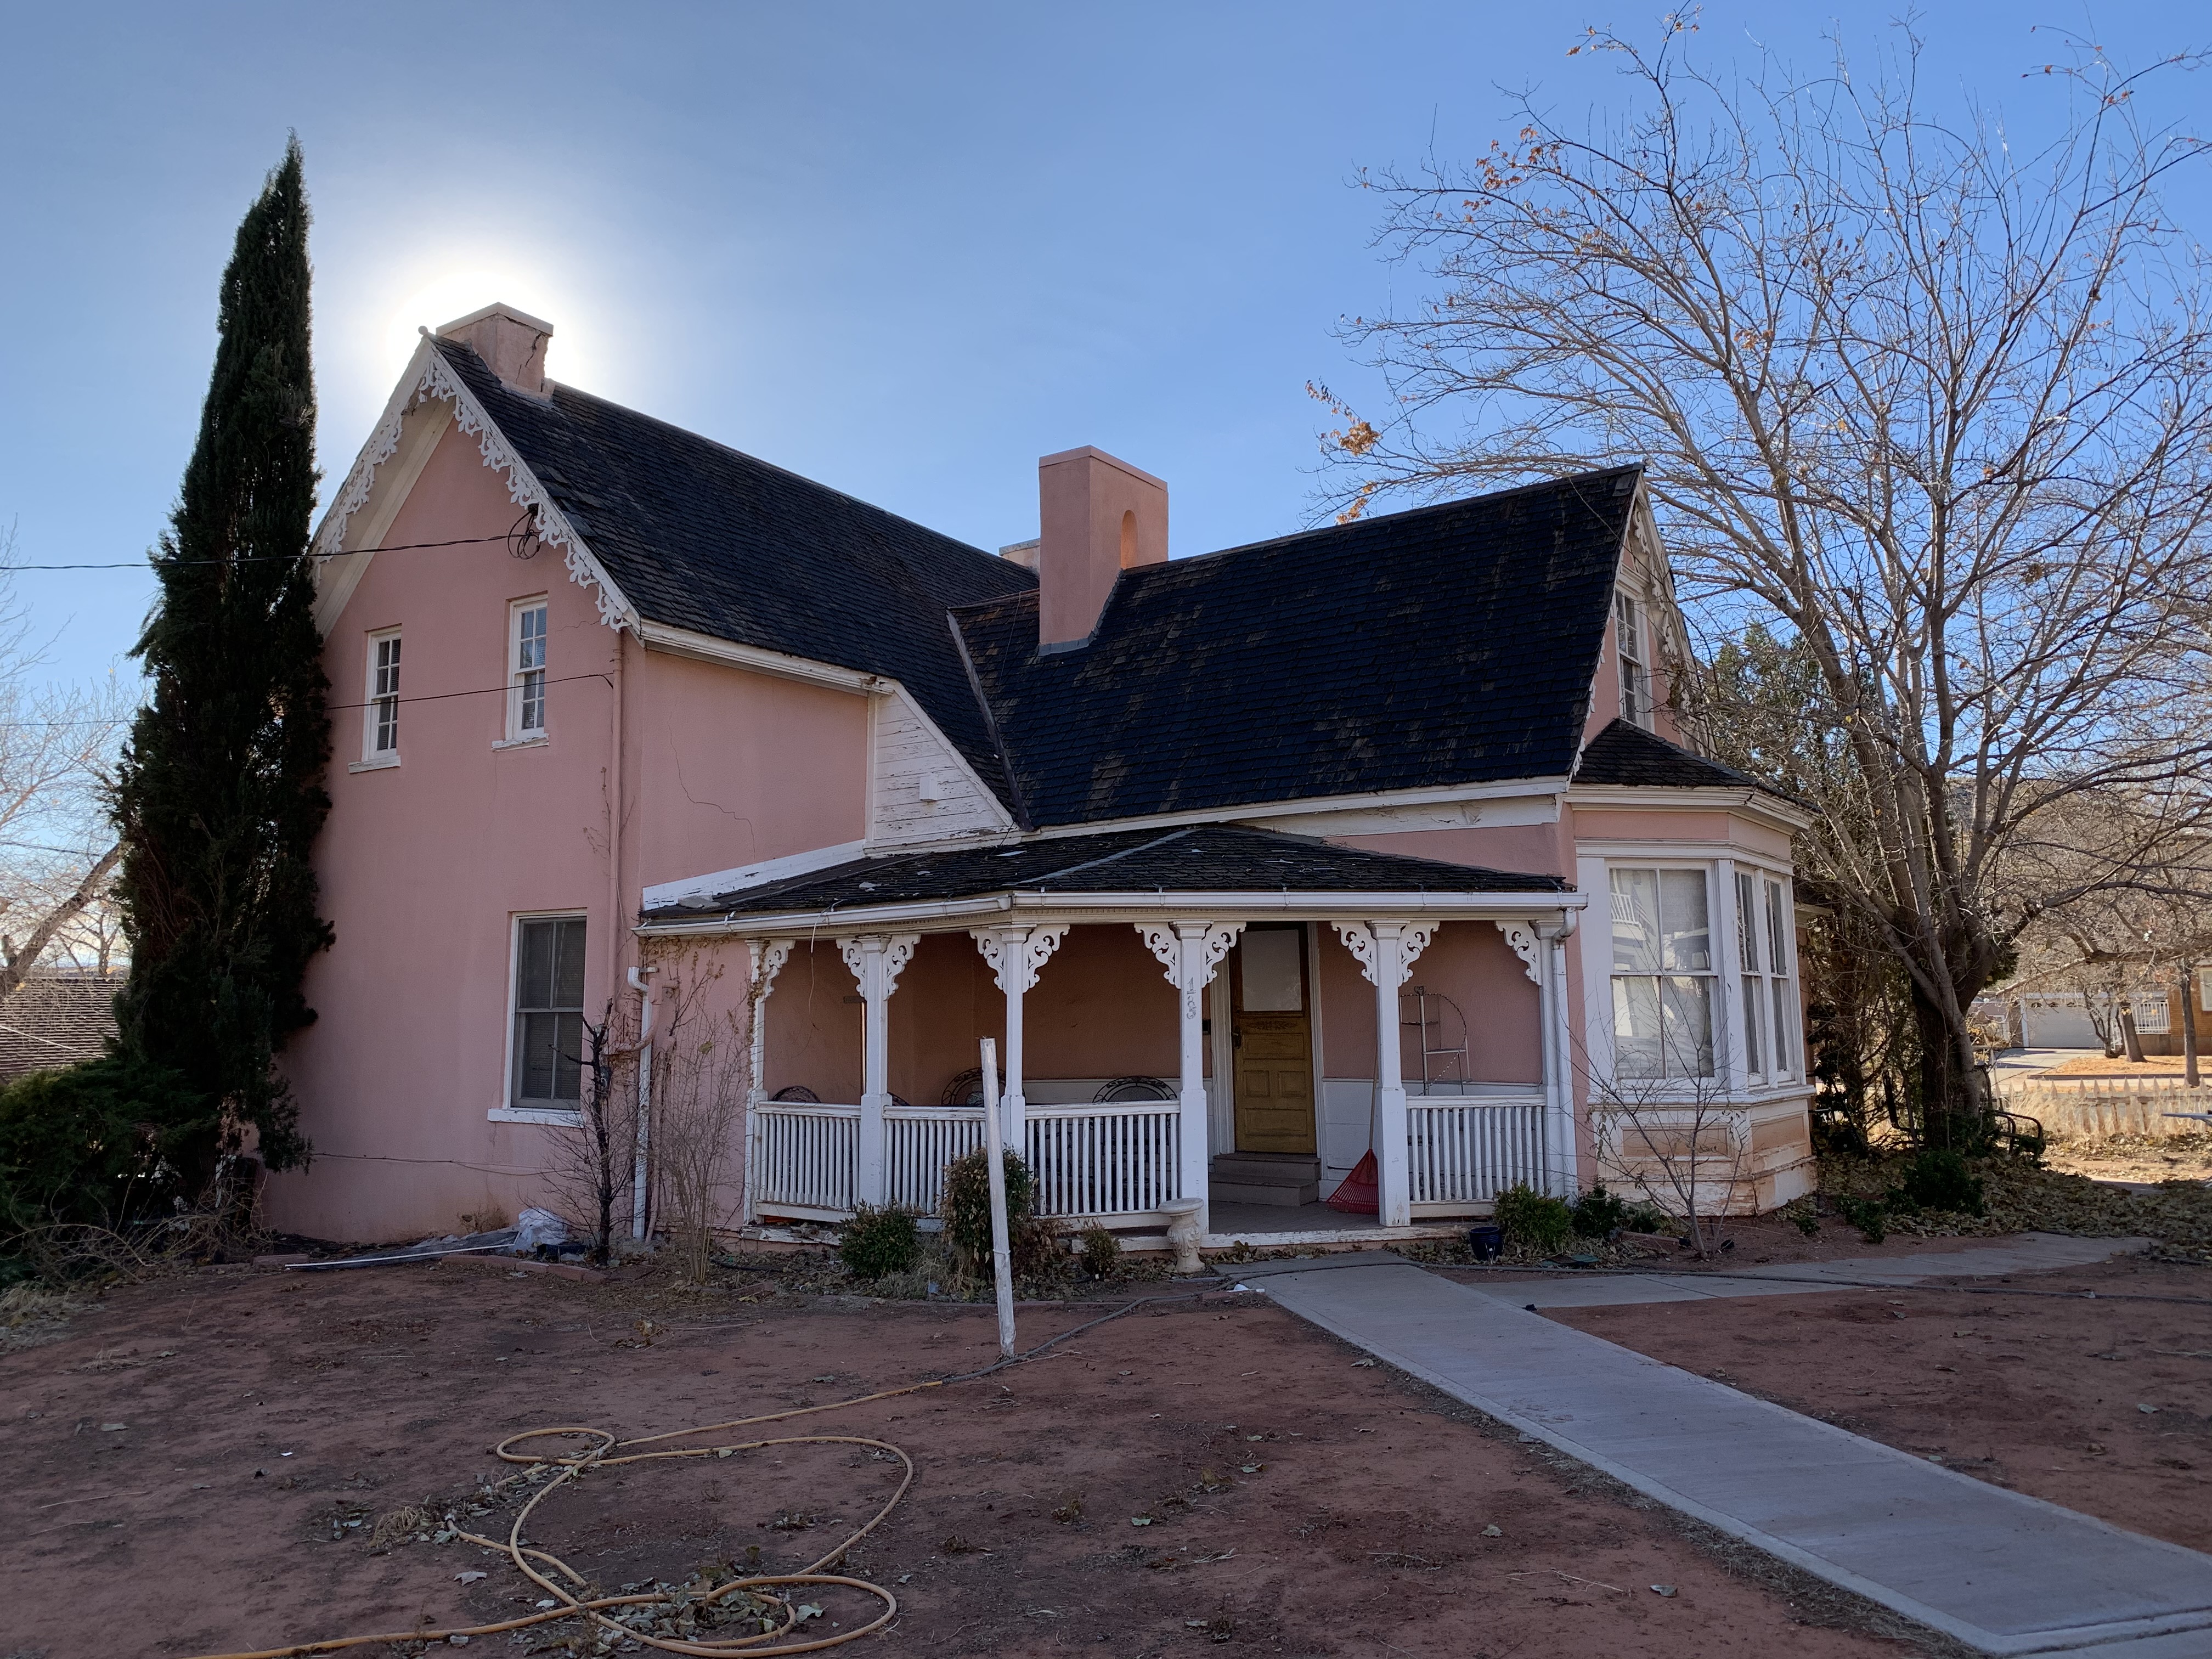 The Addie Price Home in St. George